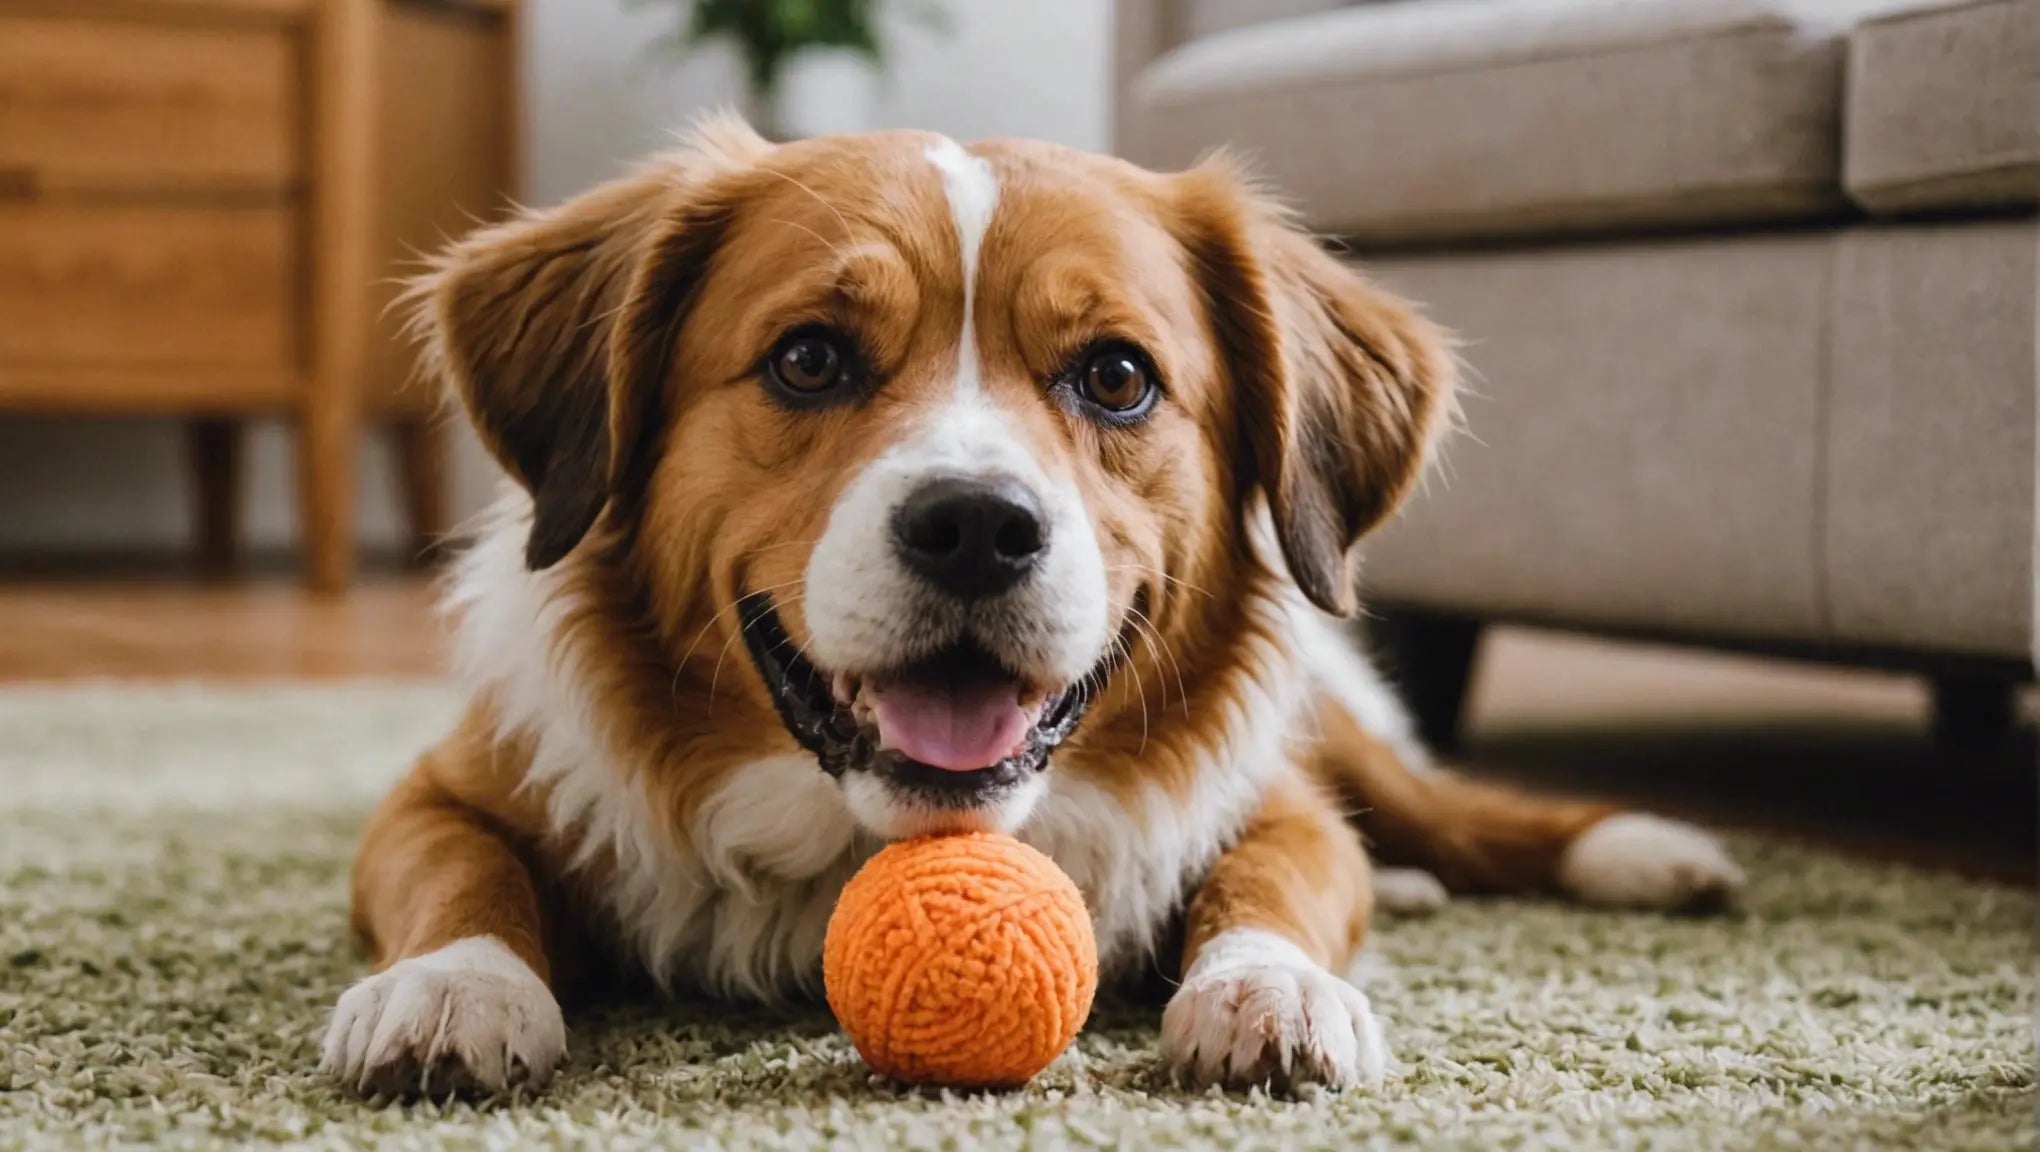 Senior Dogs Love These 10 Engaging Dog Toys